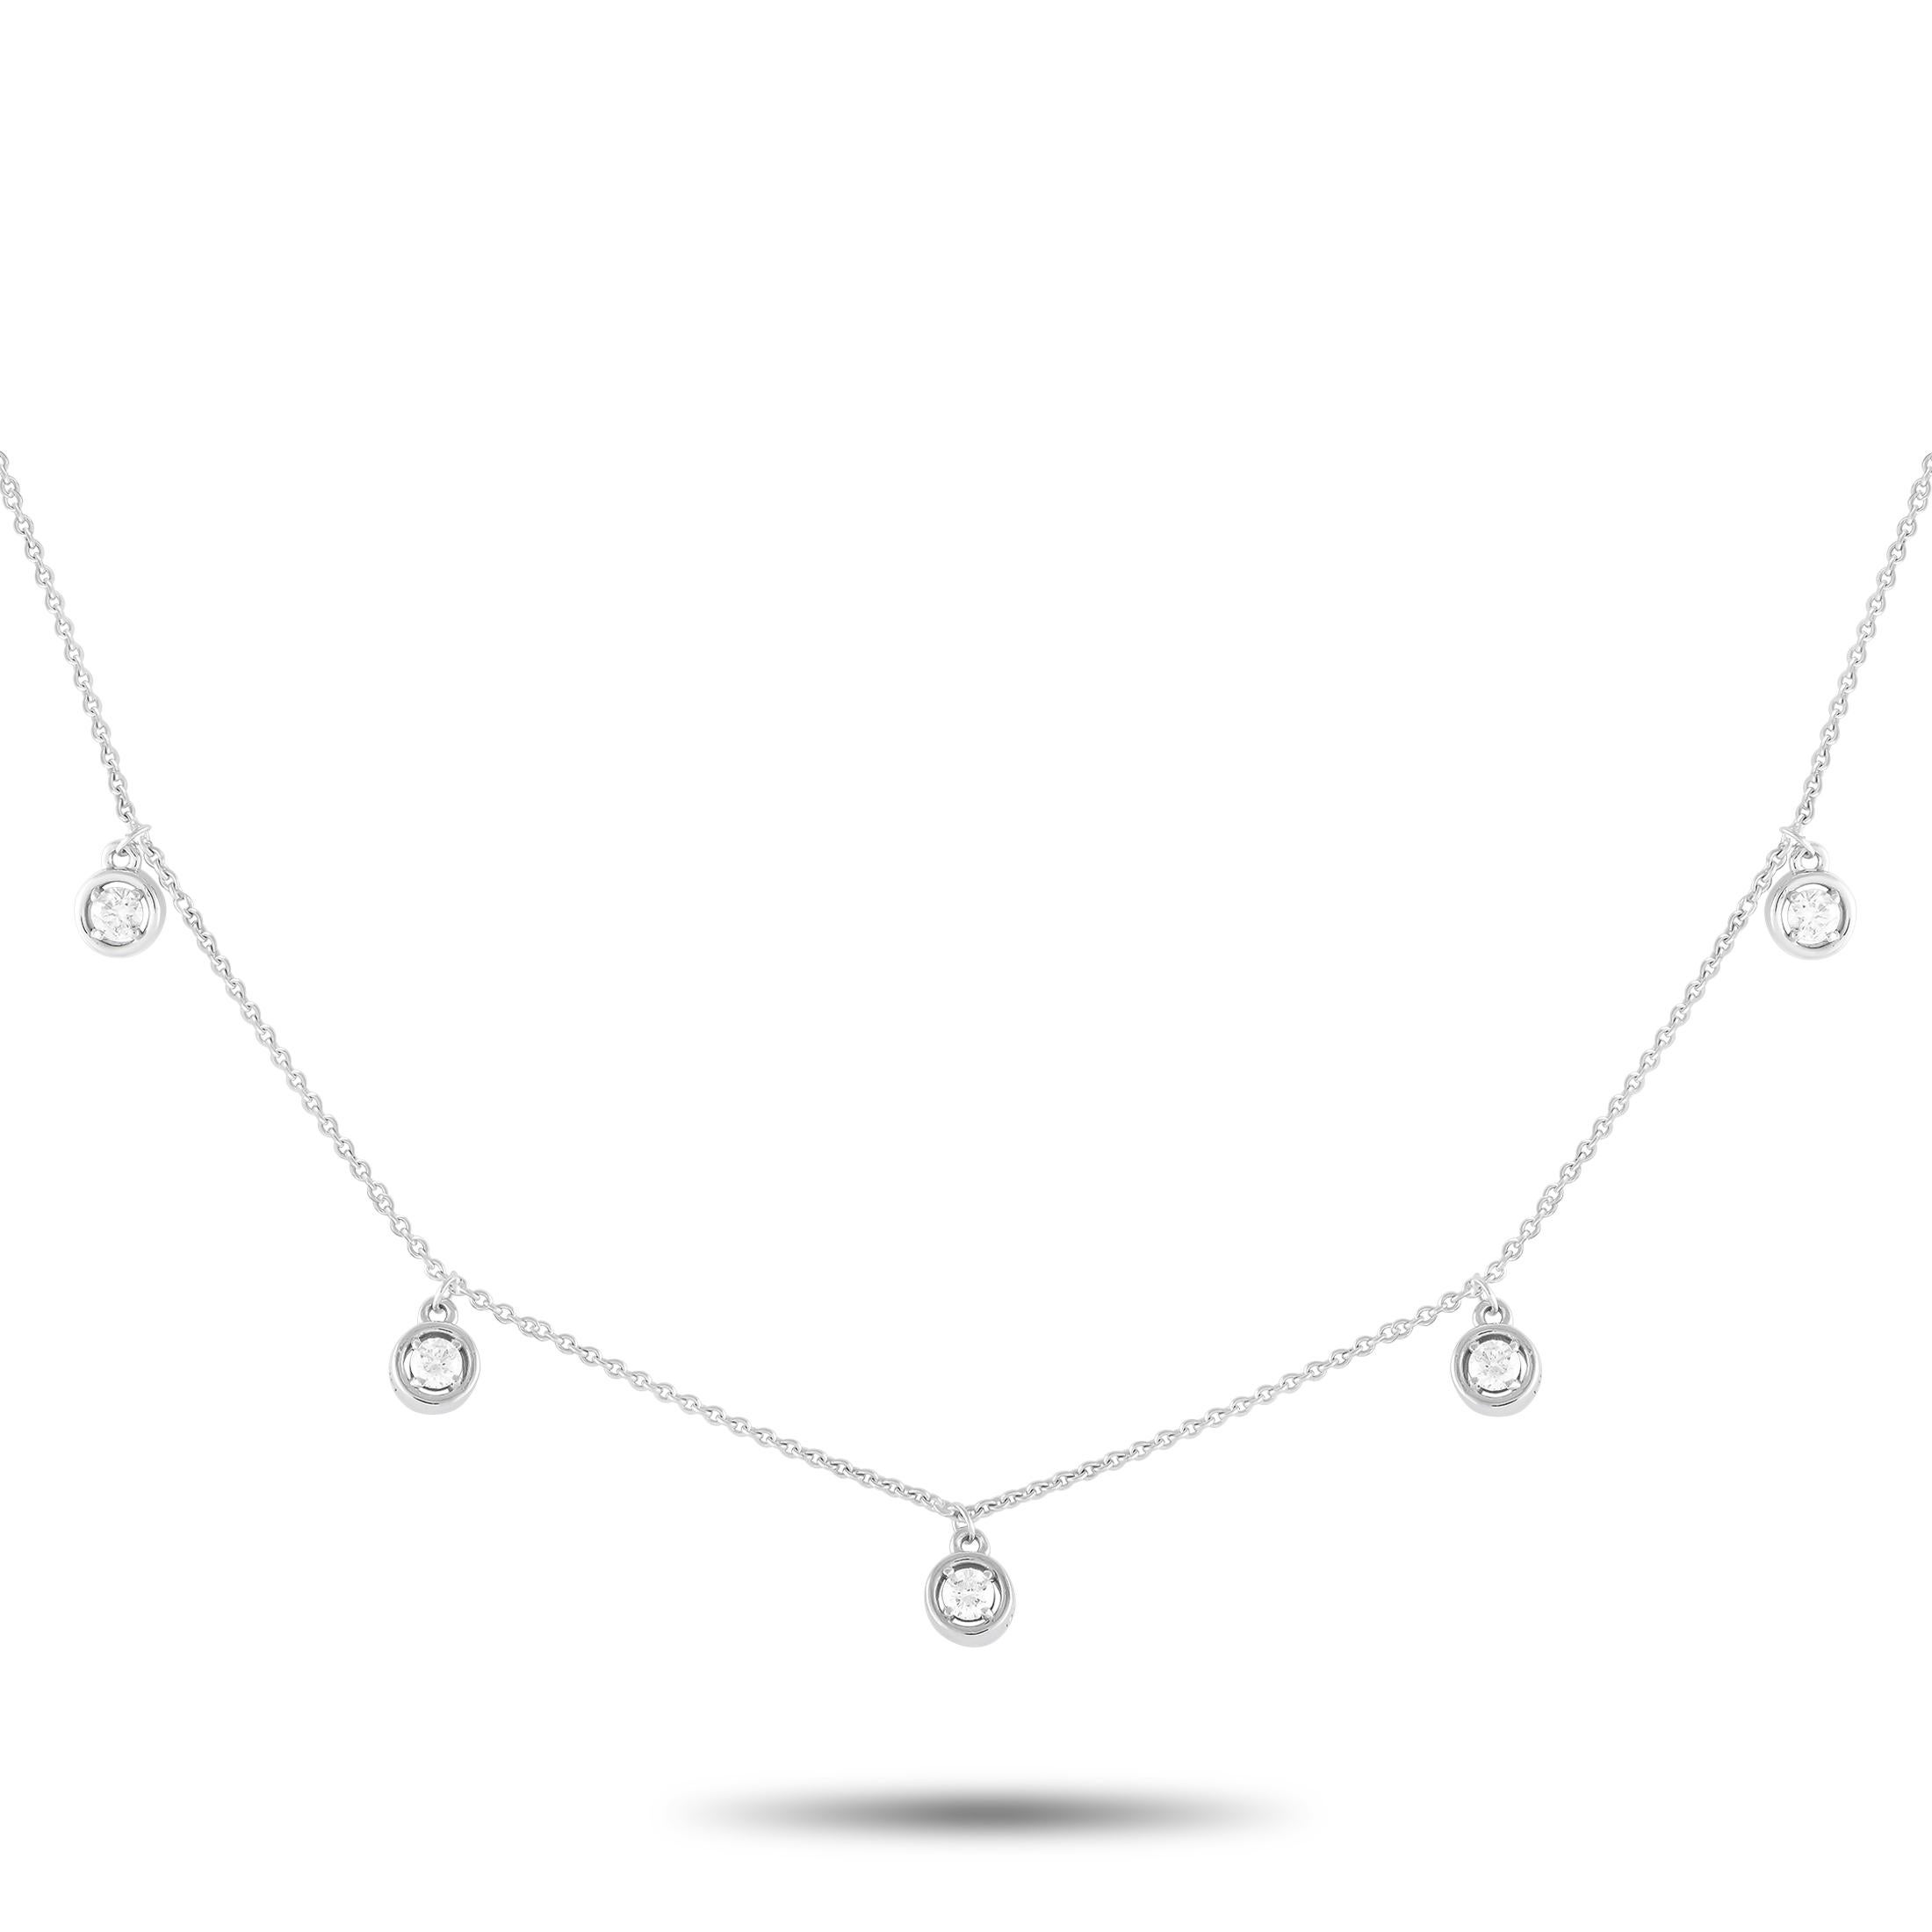 14K White Gold 0.25ct Diamond Station Necklace NK01460-W In New Condition For Sale In Southampton, PA